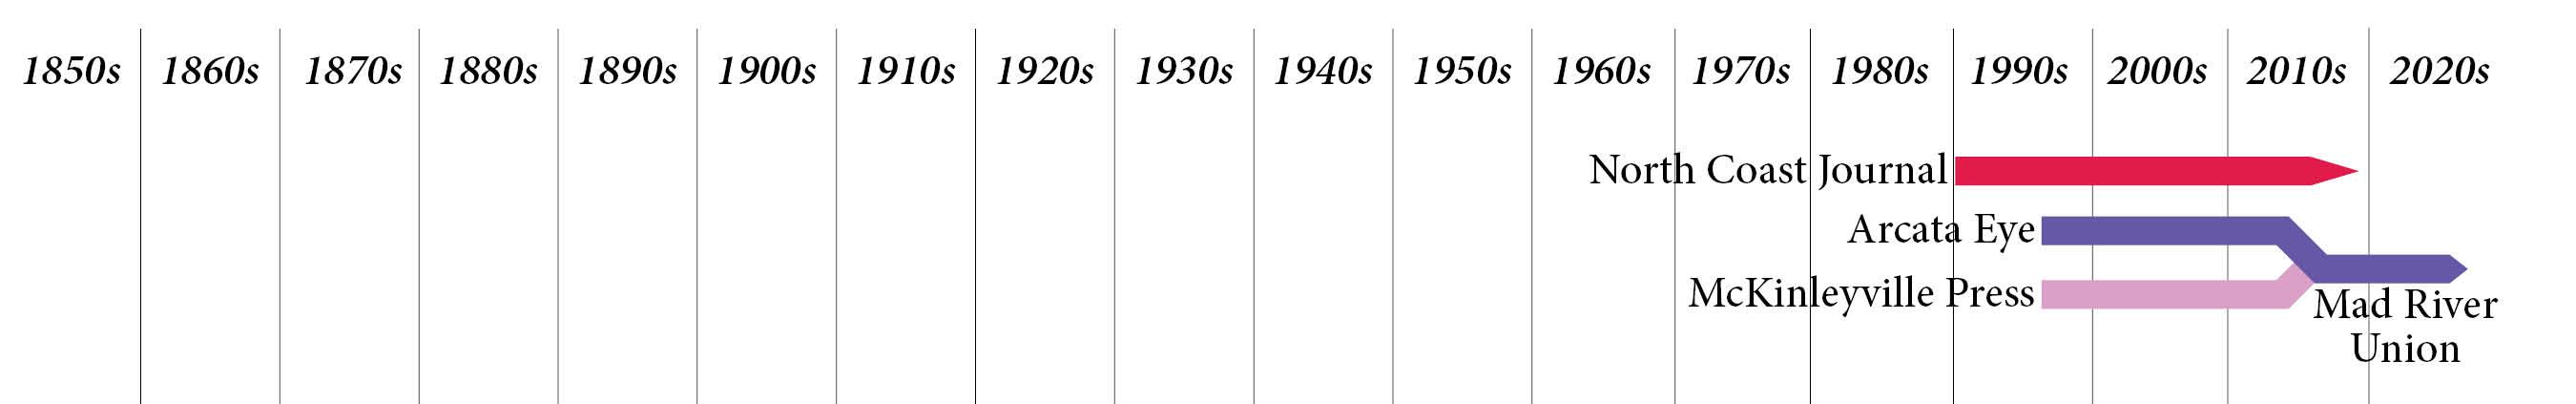 Timeline of newspapers 1996 to present